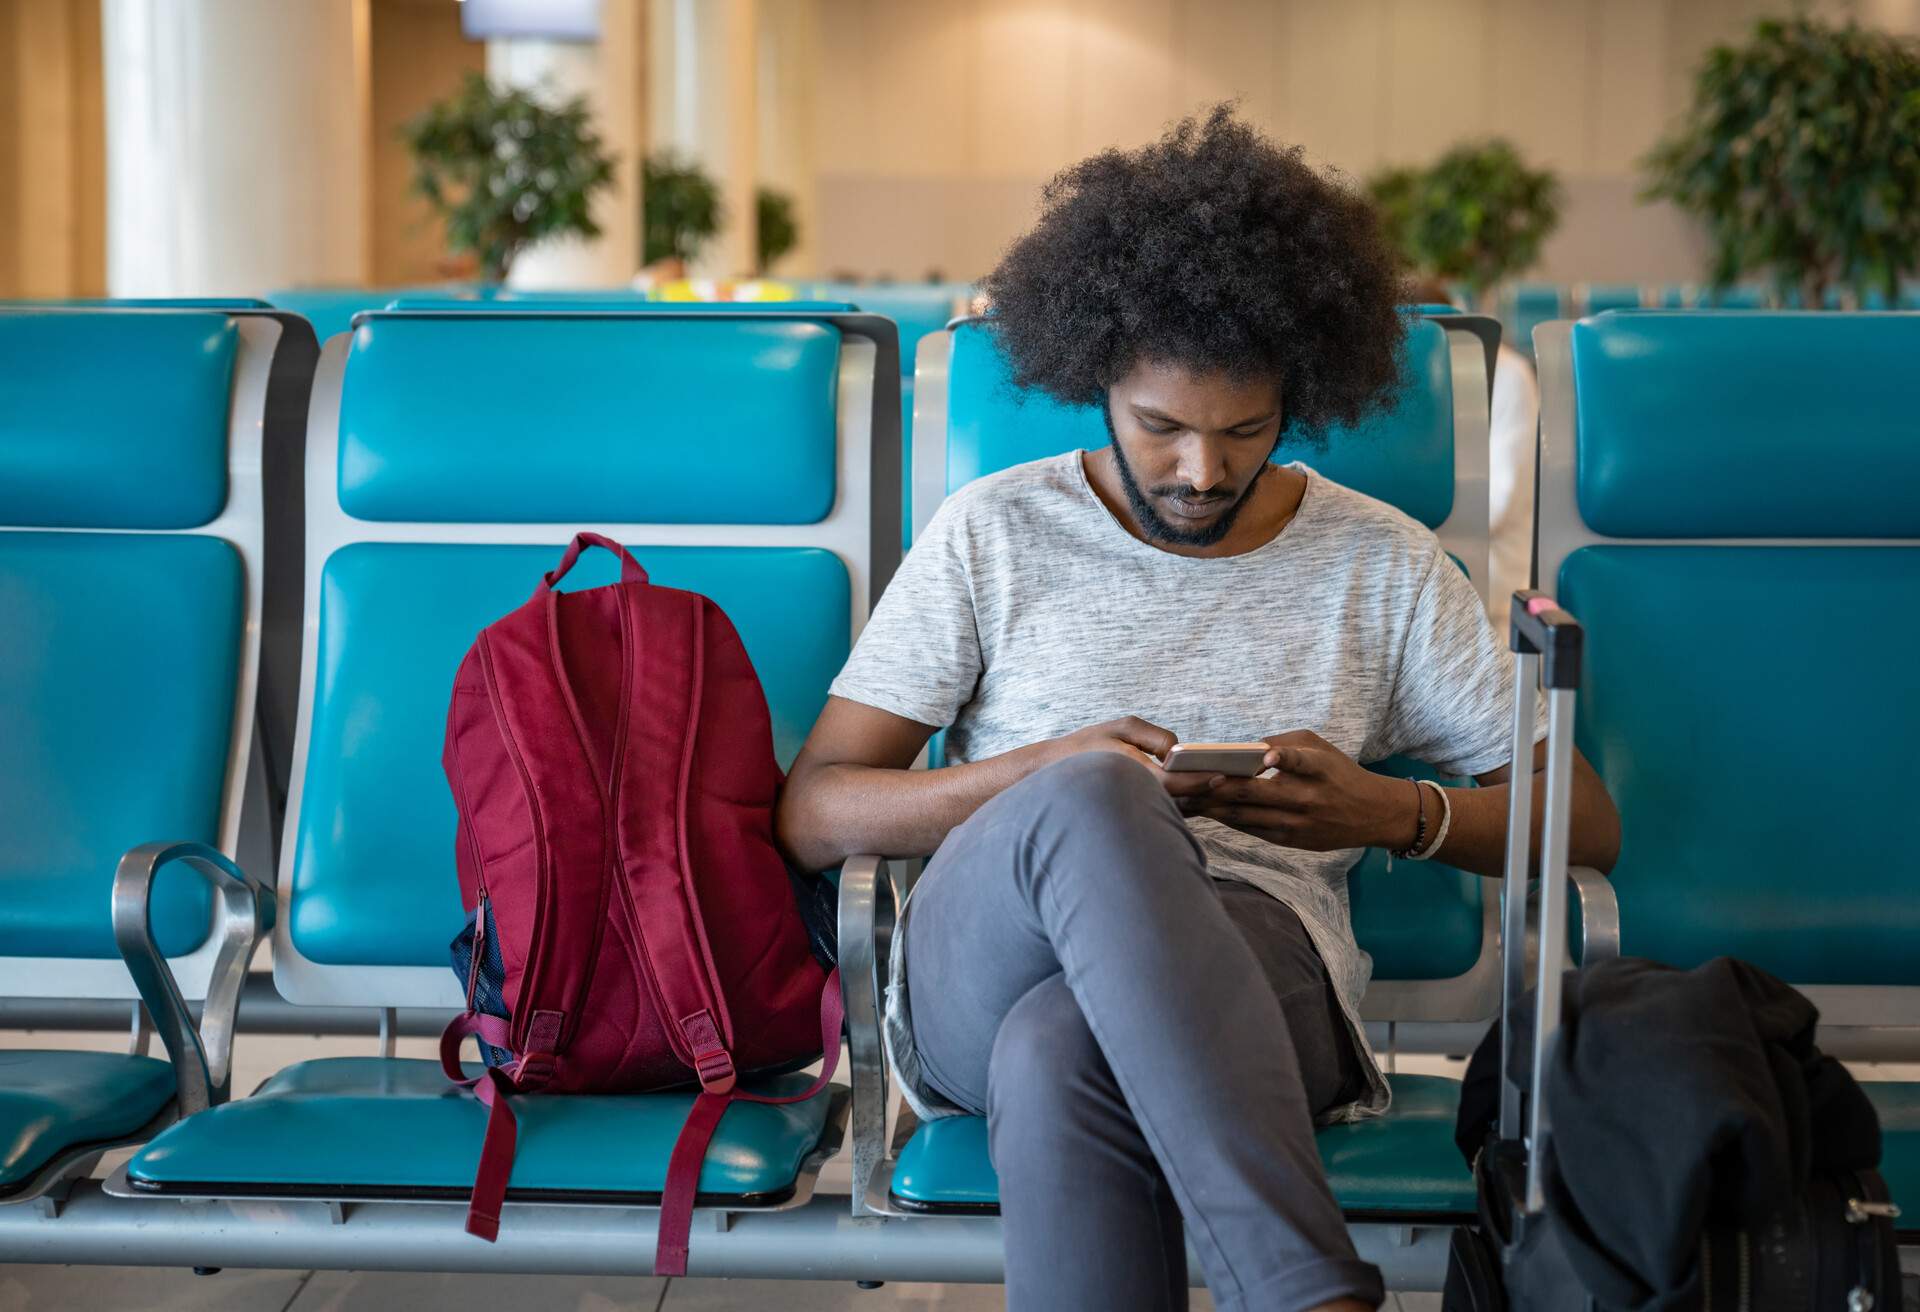 Portrait of a male traveler at the airport using his cell phone while waiting for his flight and smiling.